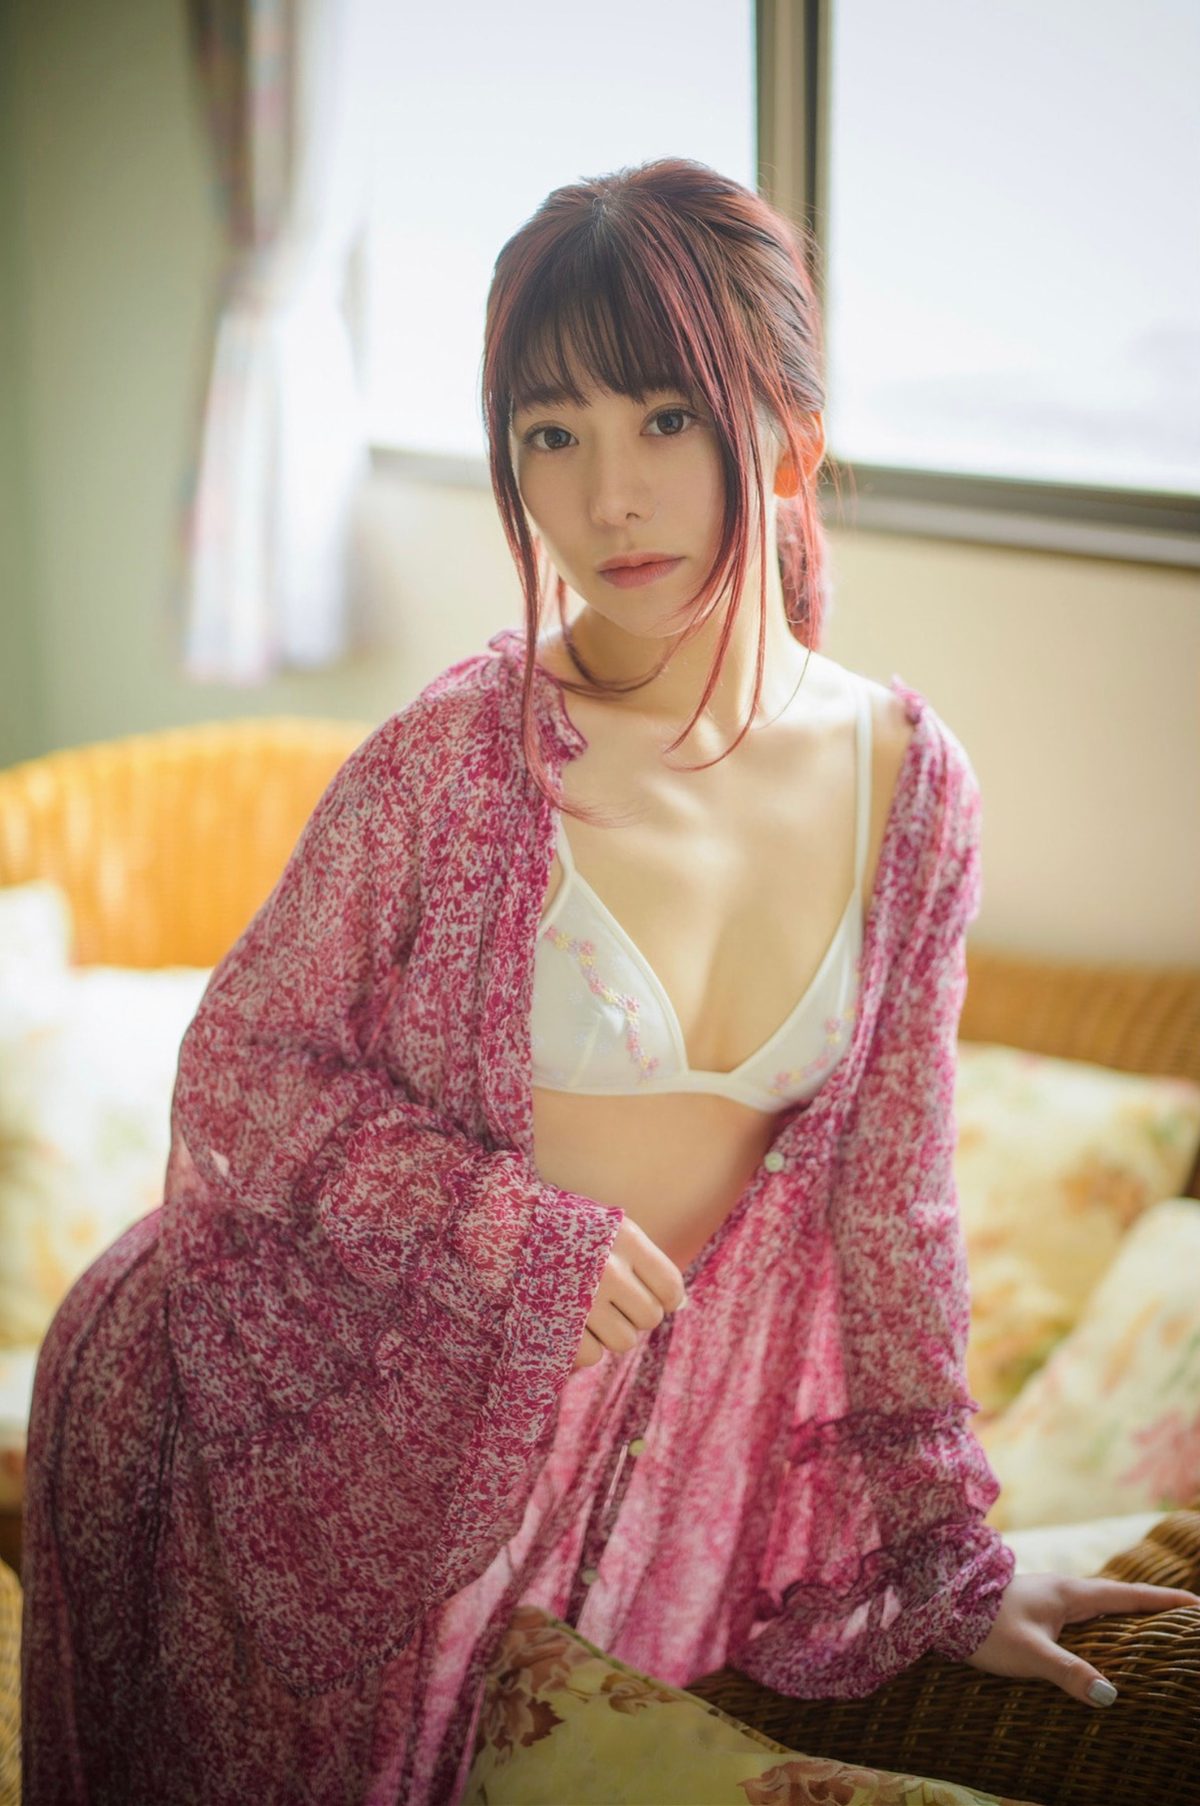 Nozomi Arimura 有村のぞみ Hair Nude Photo Collection As It Is 0013 3272490266.jpg